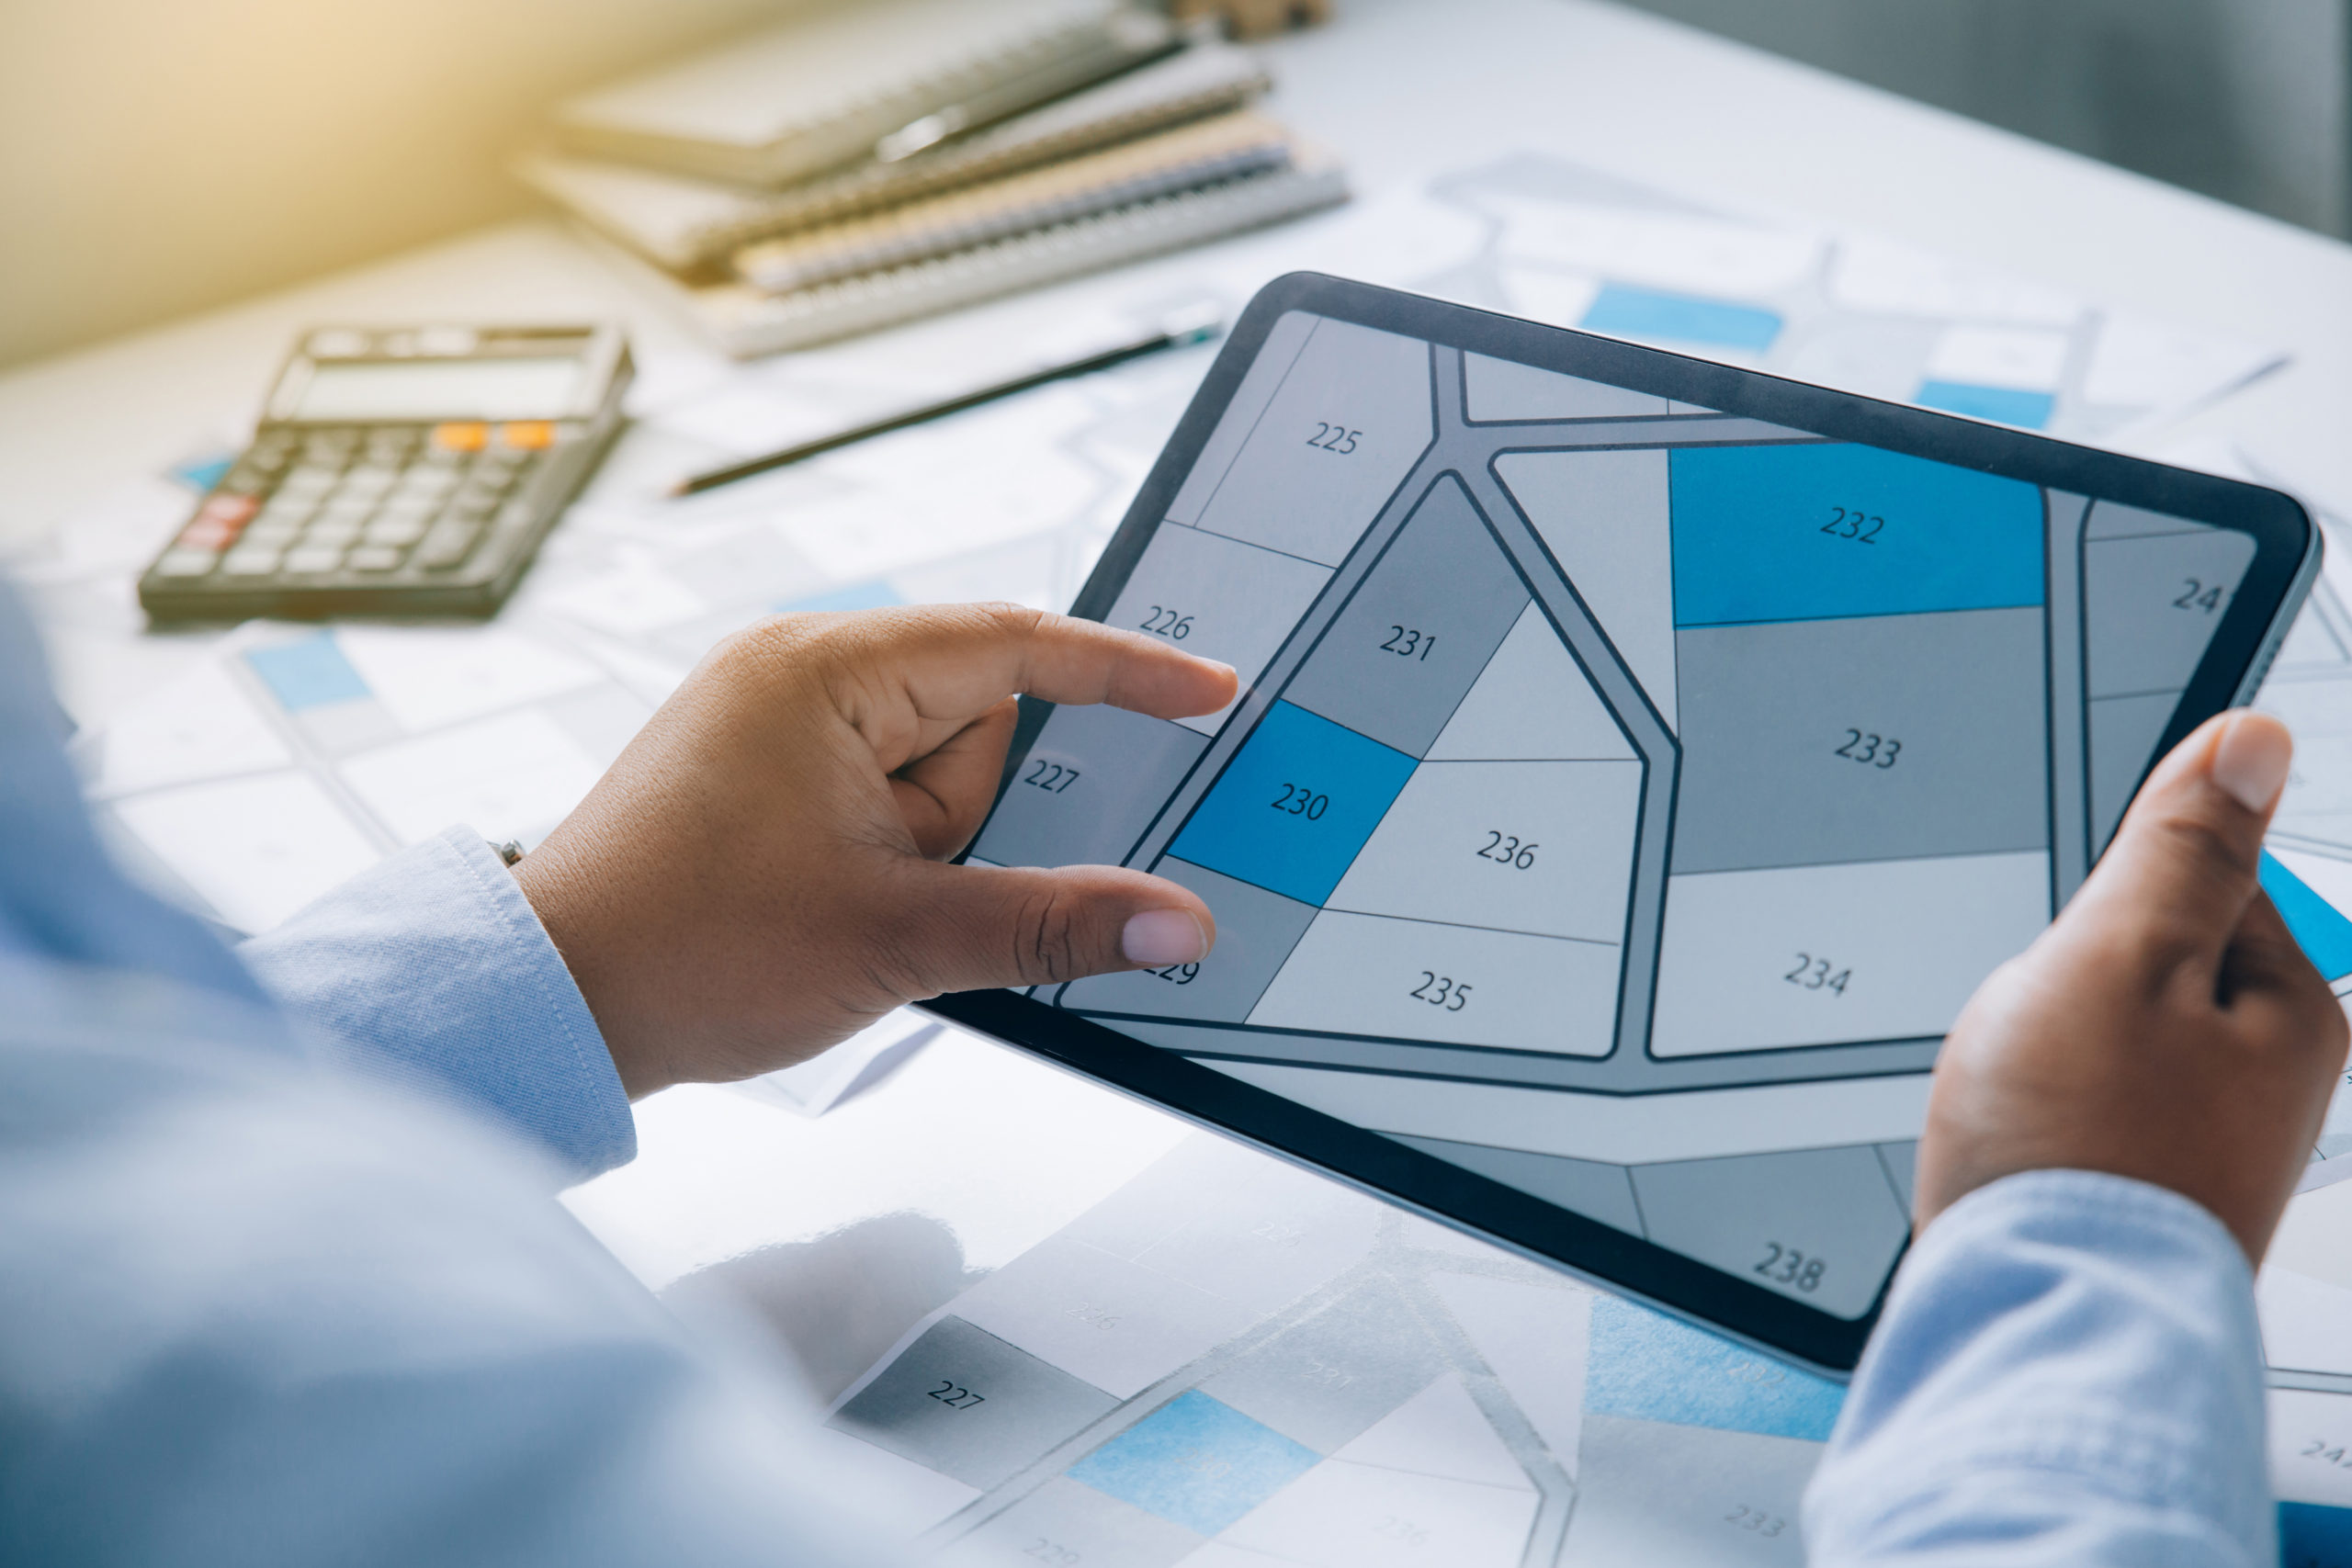 Person holding a tablet looking at lots of lands. Property management. The Importance of Finding the Right Commercial Property Management Service.